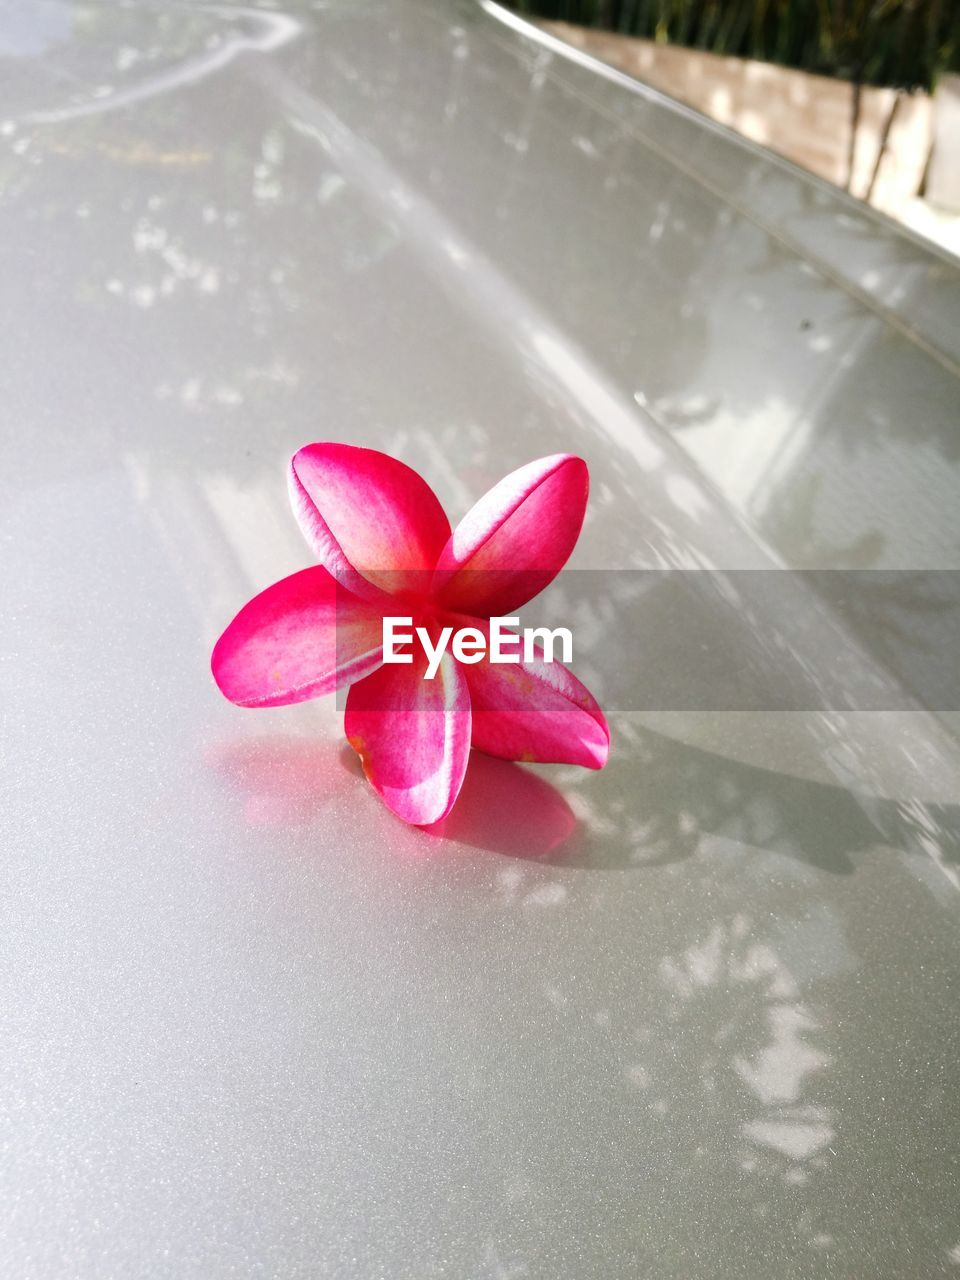 HIGH ANGLE VIEW OF PINK FLOWER